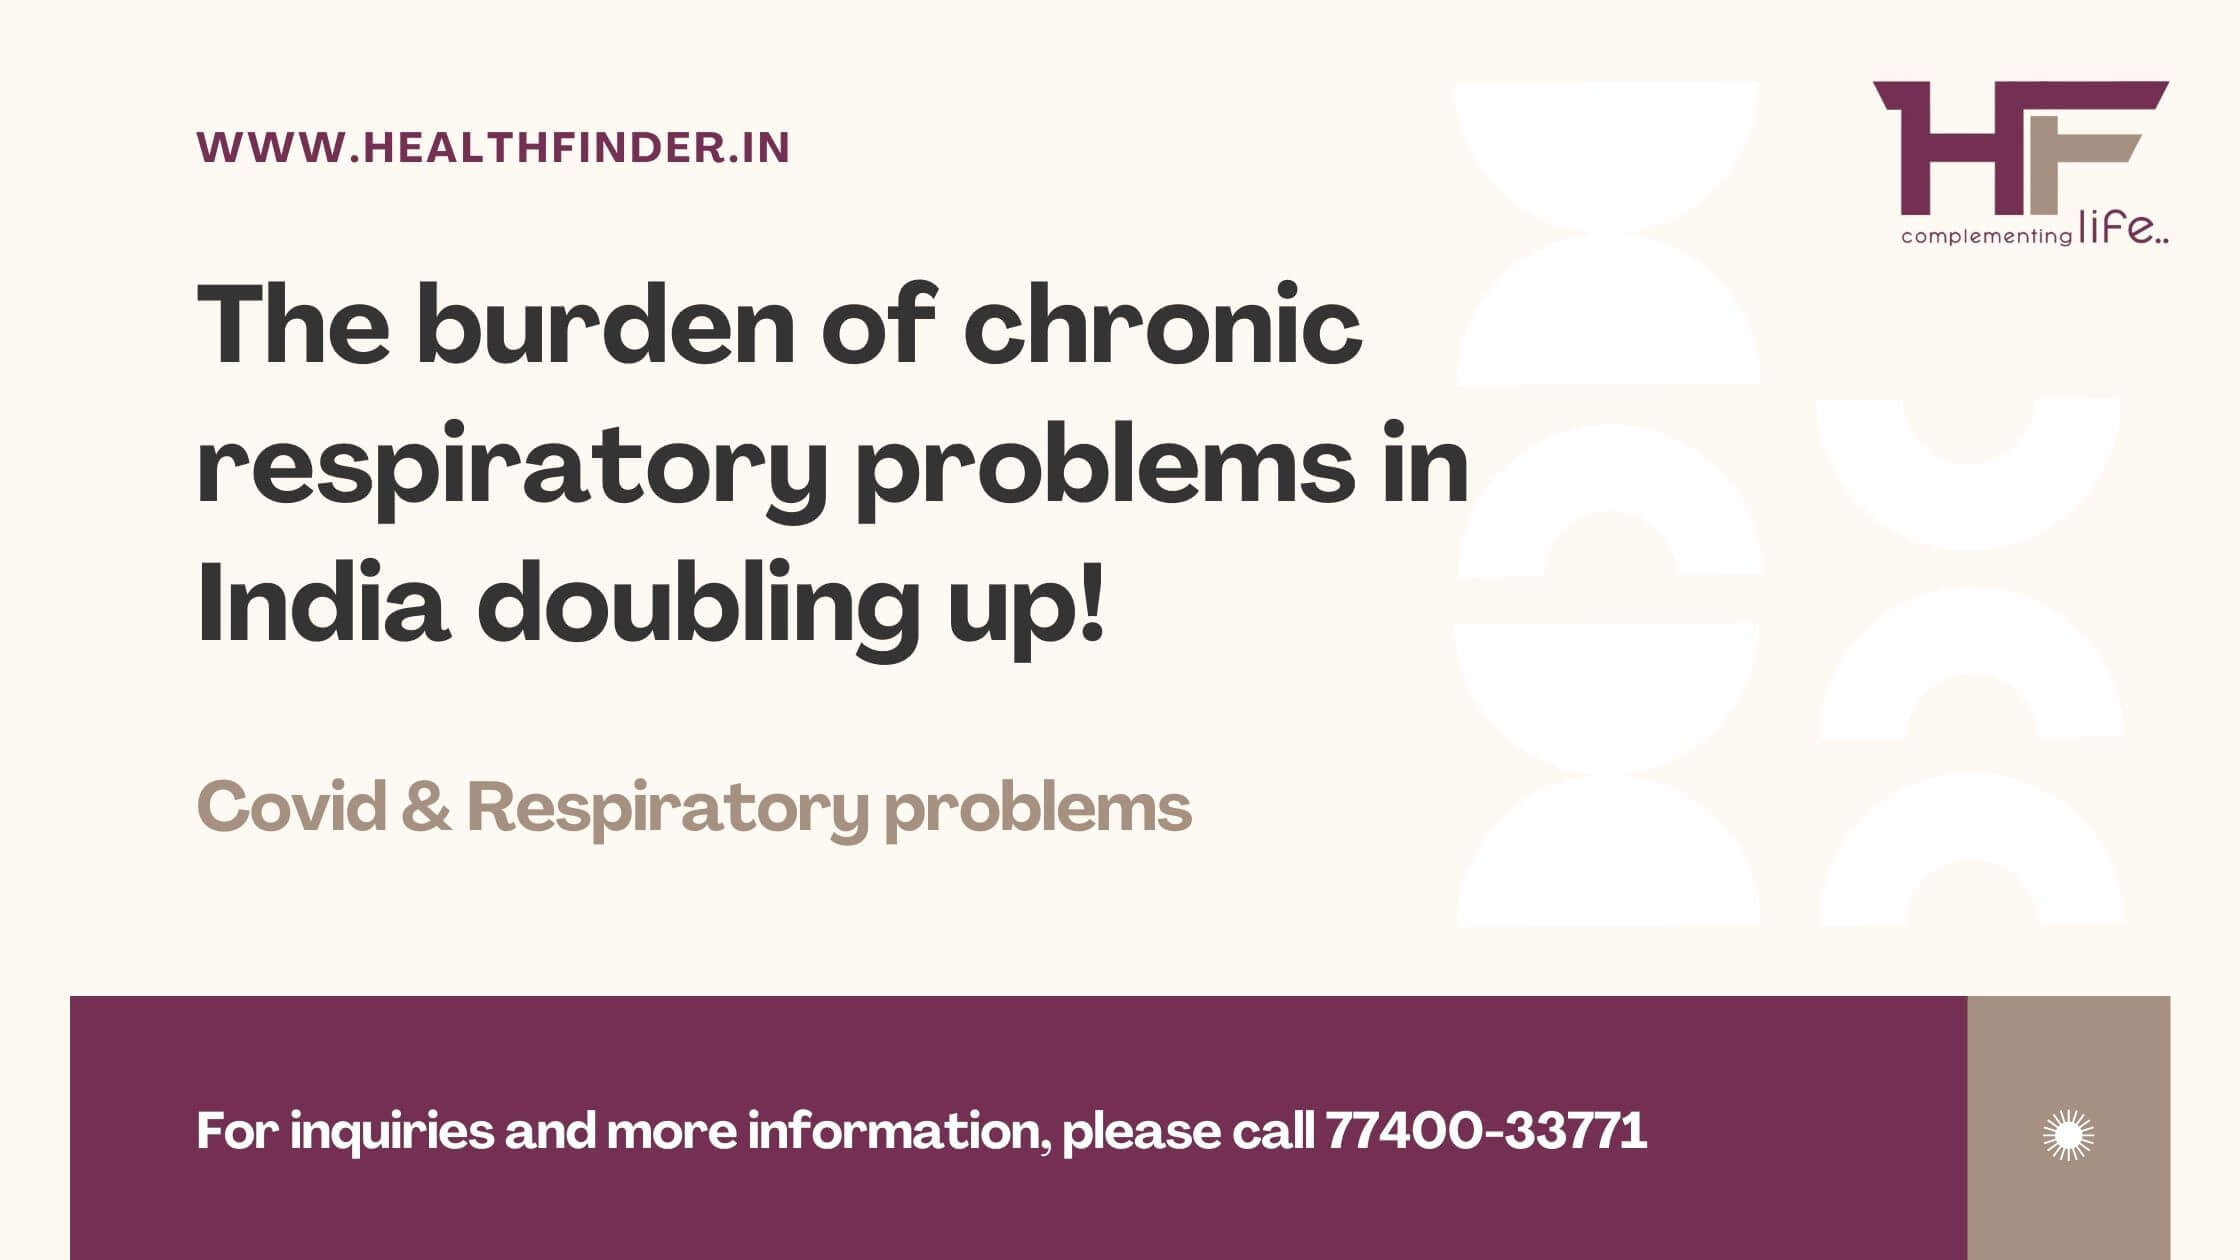 The burden of chronic respiratory problems in India doubling up!